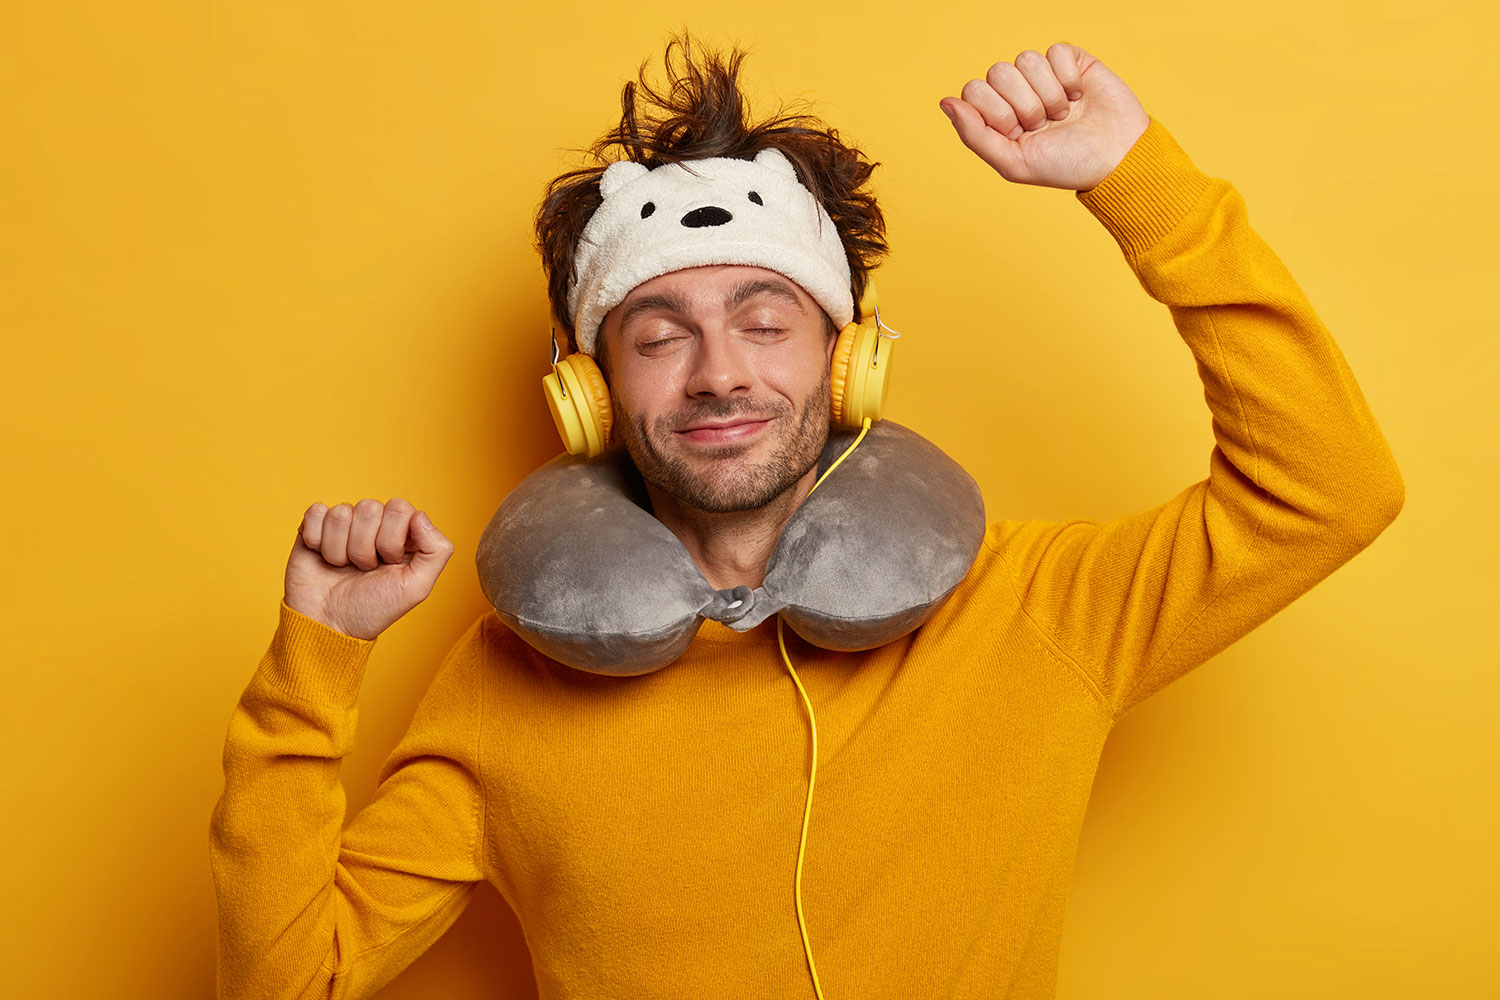 When you learn a new language, the best way to learn is by immersion. But what if you can't travel to a French-speaking country? Don't worry – there is another way! You can learn while you sleep. Yes, it's true! All you need is a little bit of audio content in French and some headphones. With this method, you'll be able to pick up new words and phrases while you're drifting off to sleep. And who knows – maybe one day you'll be able to have a conversation in French without even realizing it! Bonne nuit!